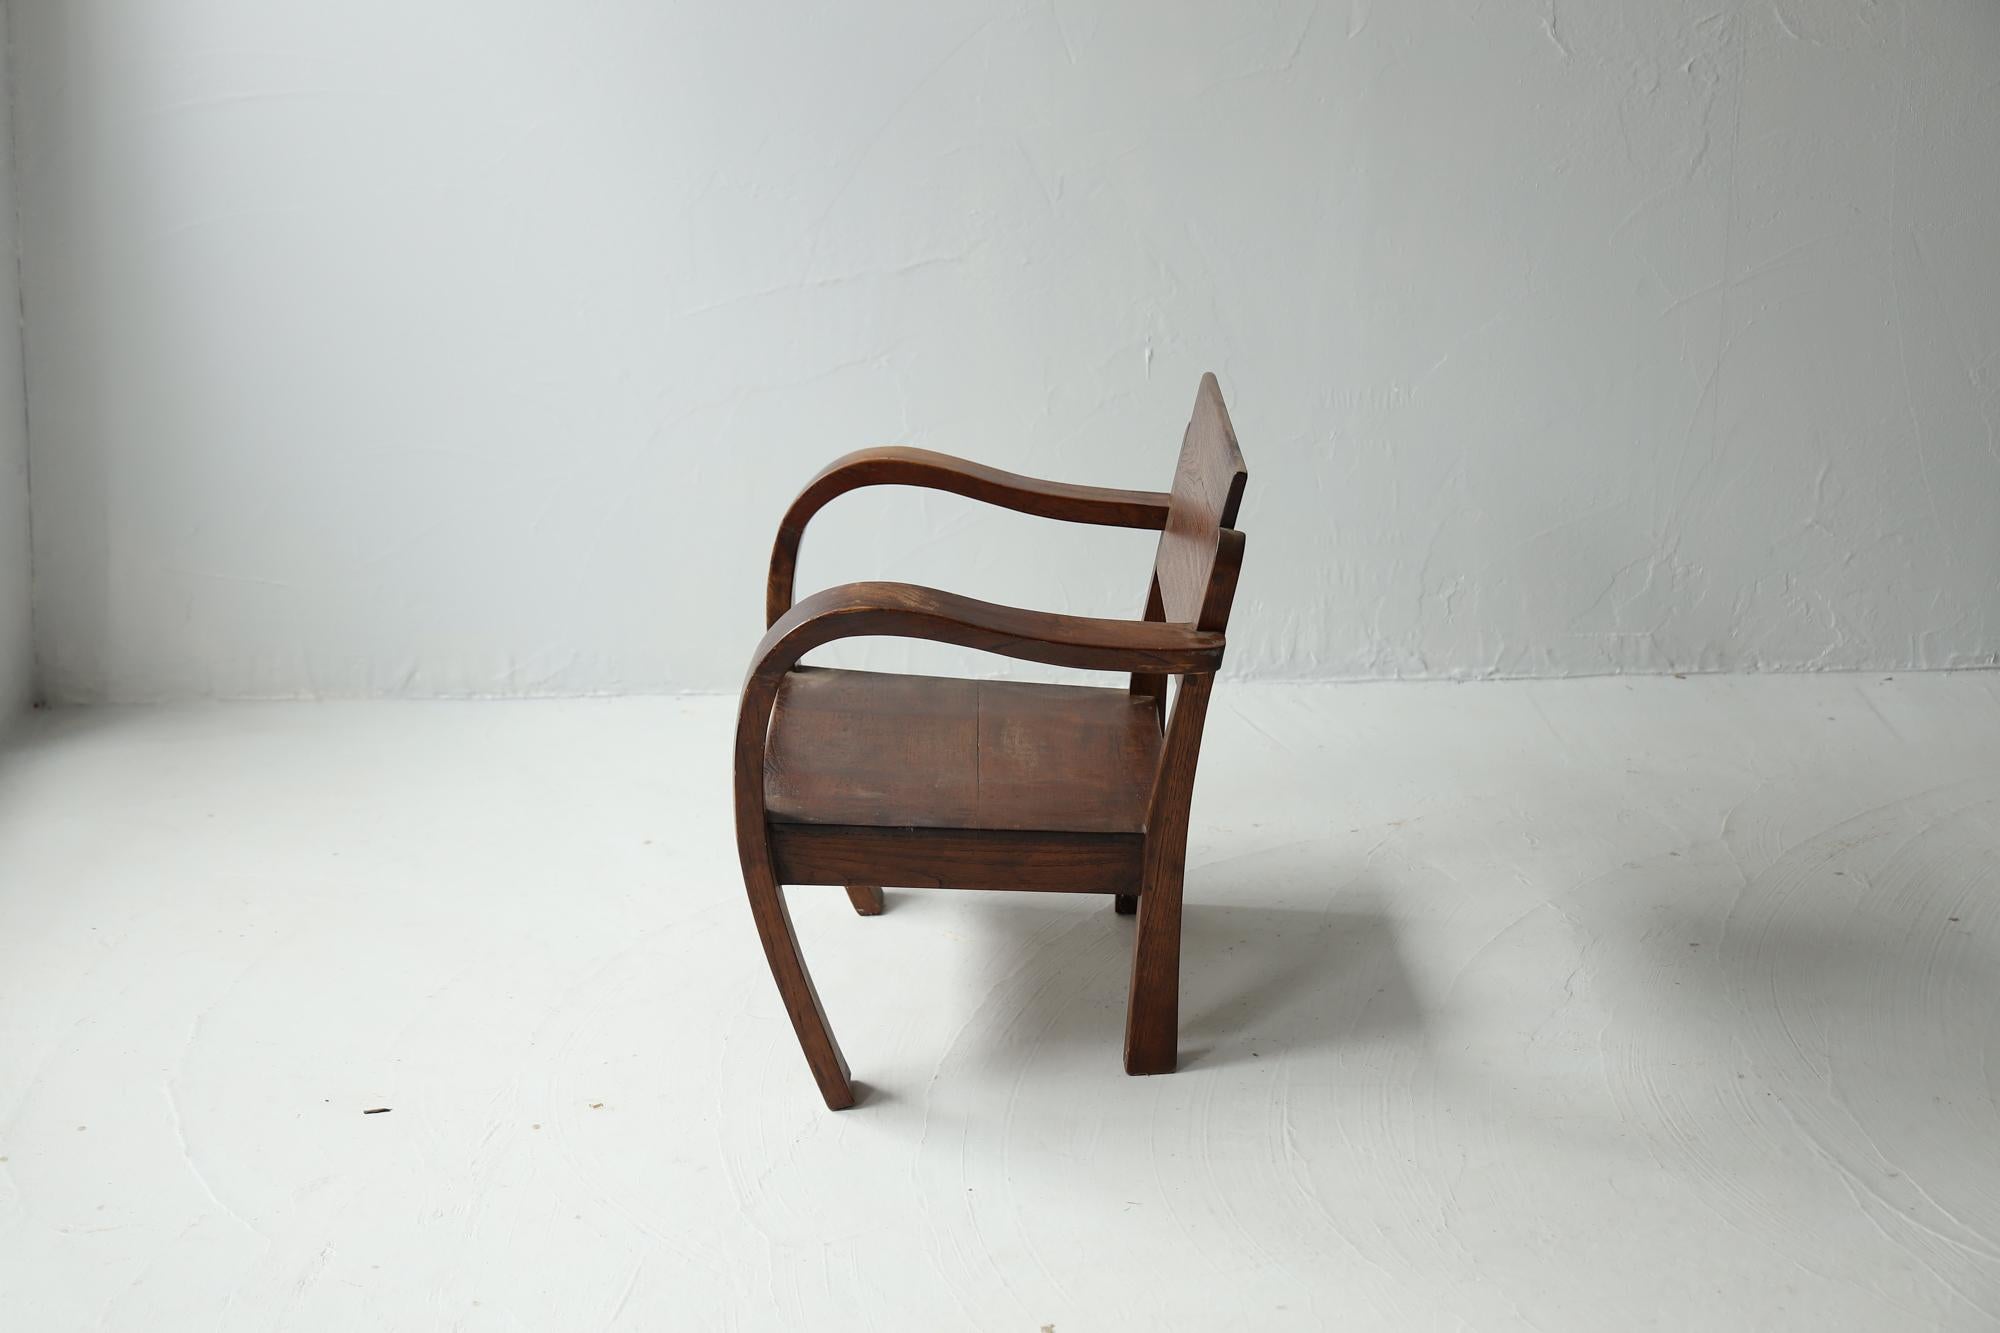 Japanese Antique Chair, Primitive Japanese Wooden Chair, Wabi-Sabi In Good Condition For Sale In Katori-Shi, 12